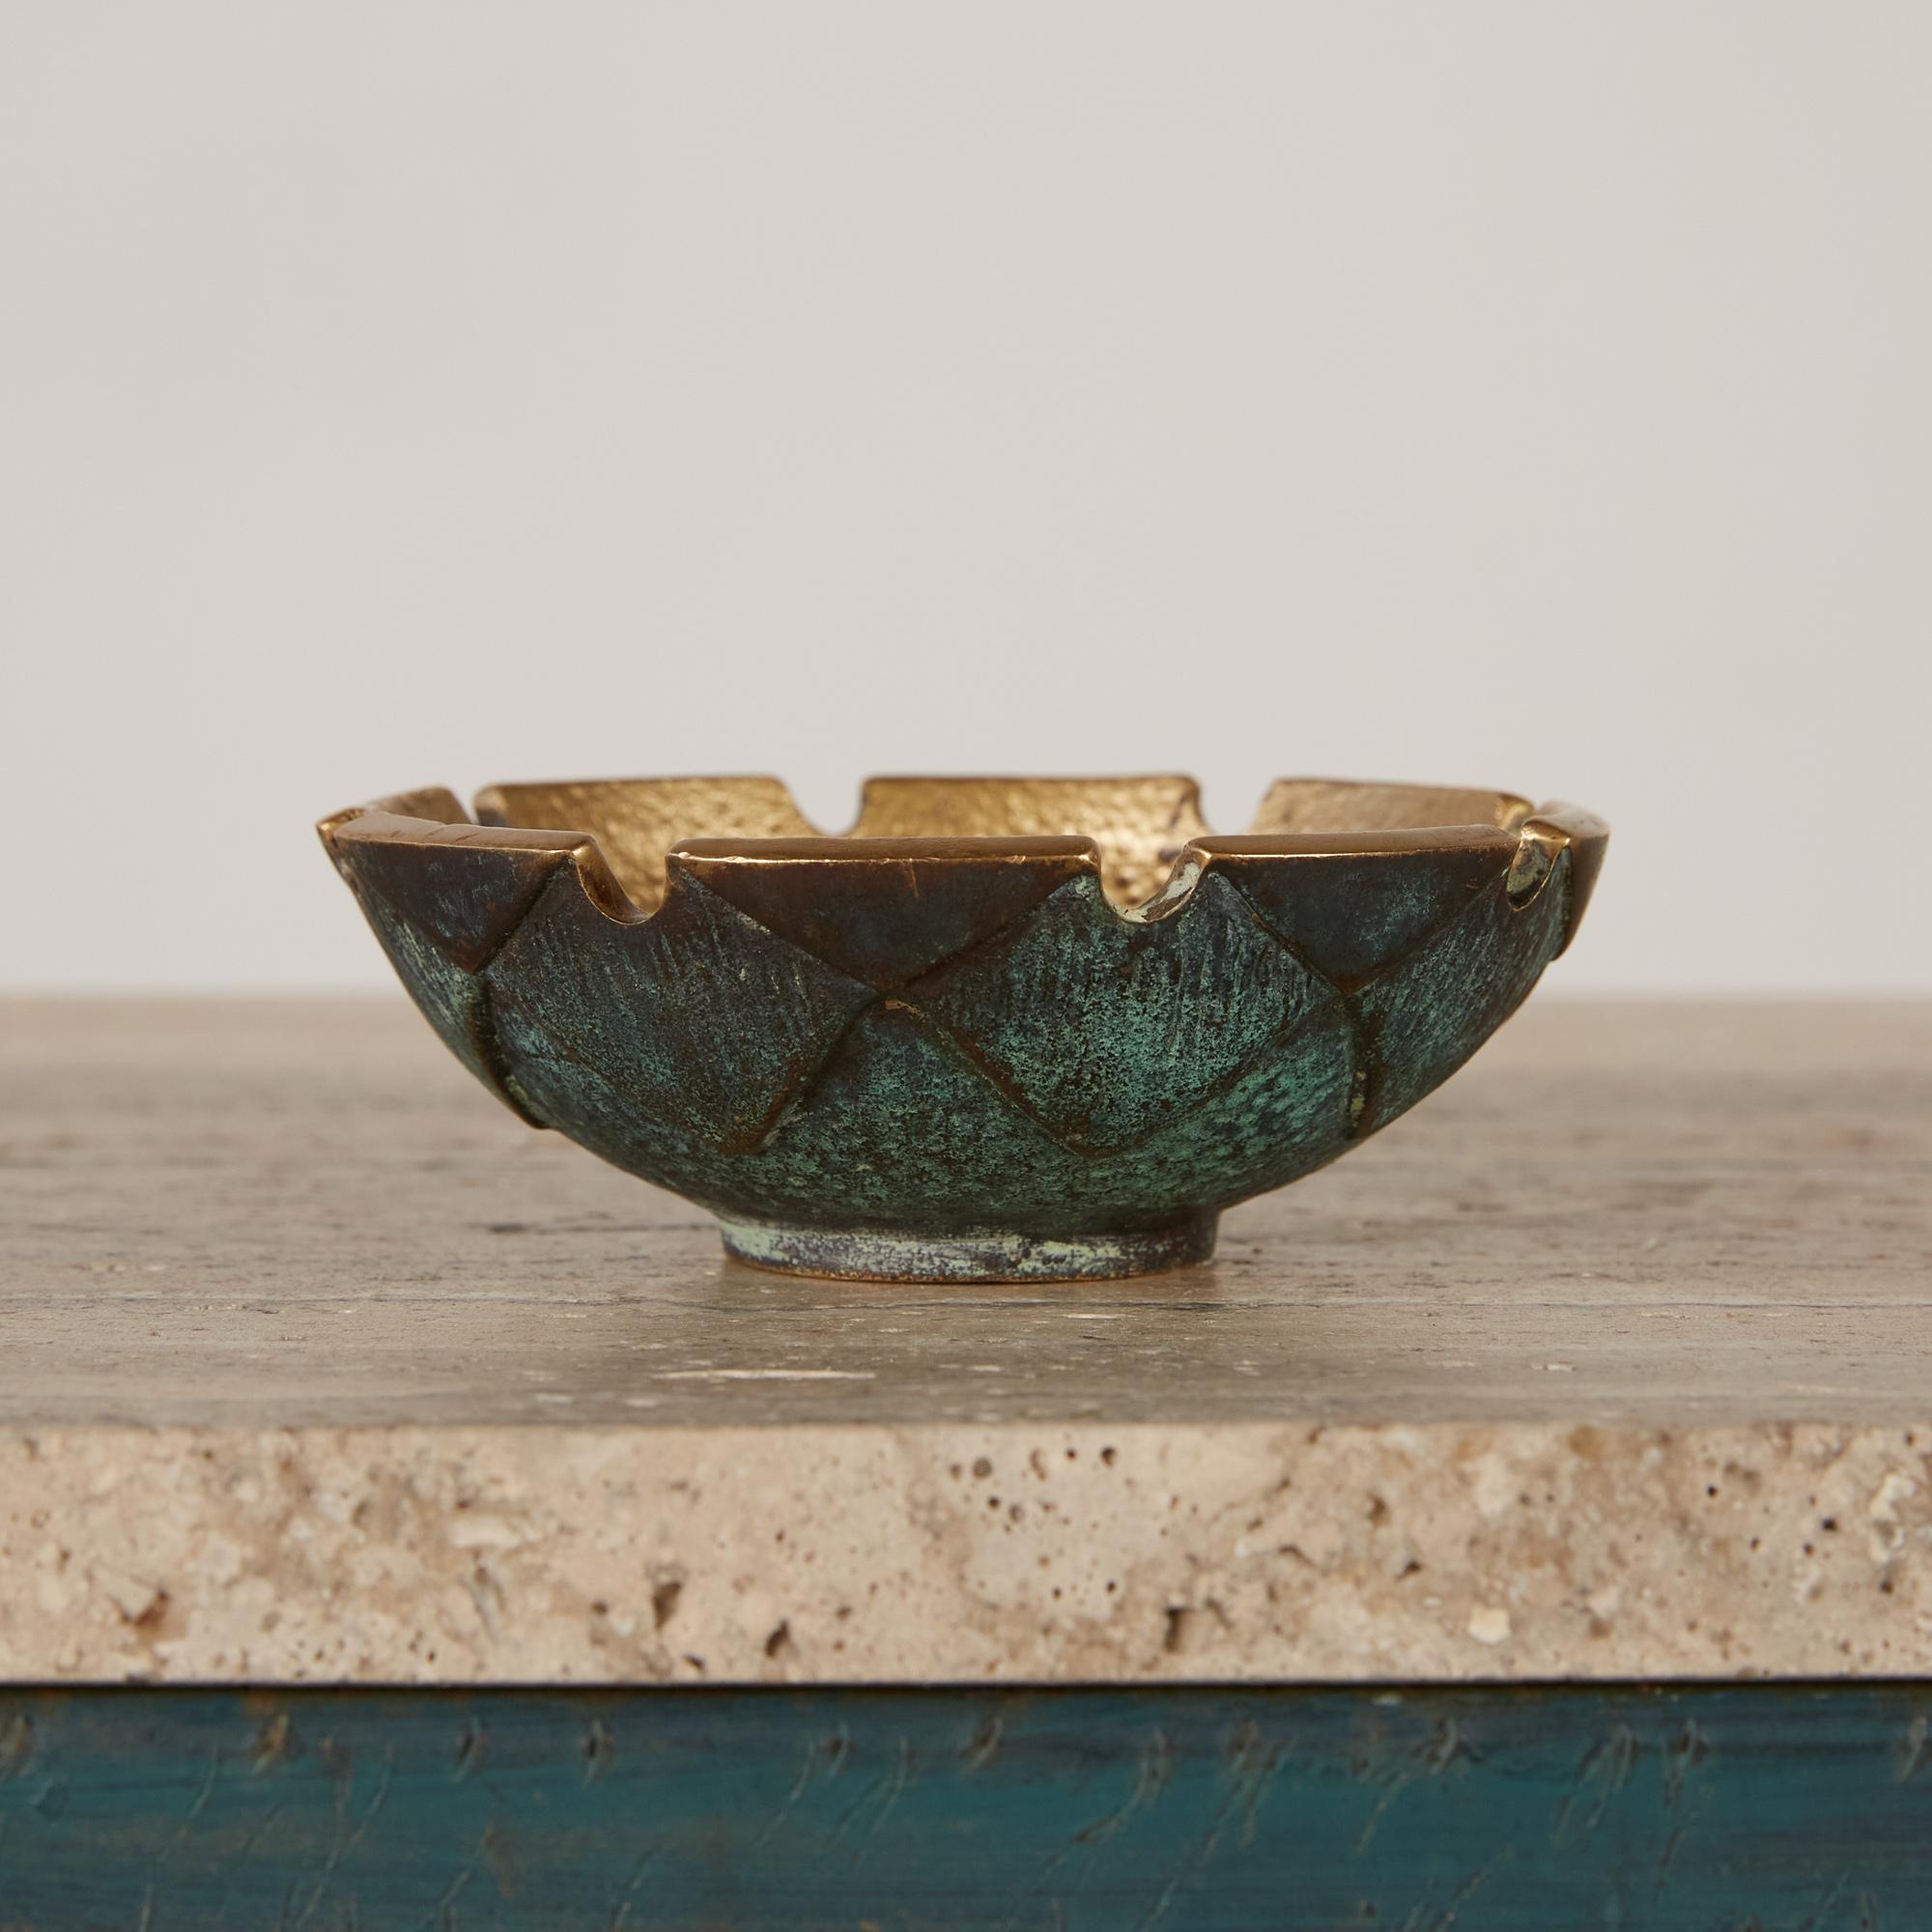 A solid bronze round ashtray with object resting details all around. It has a gilt bronze pebbled interior and beautiful deep rich verdigris finish on the underside. It is made in Israel by Nordia and is marked on the underside.

Dimensions: 4.75